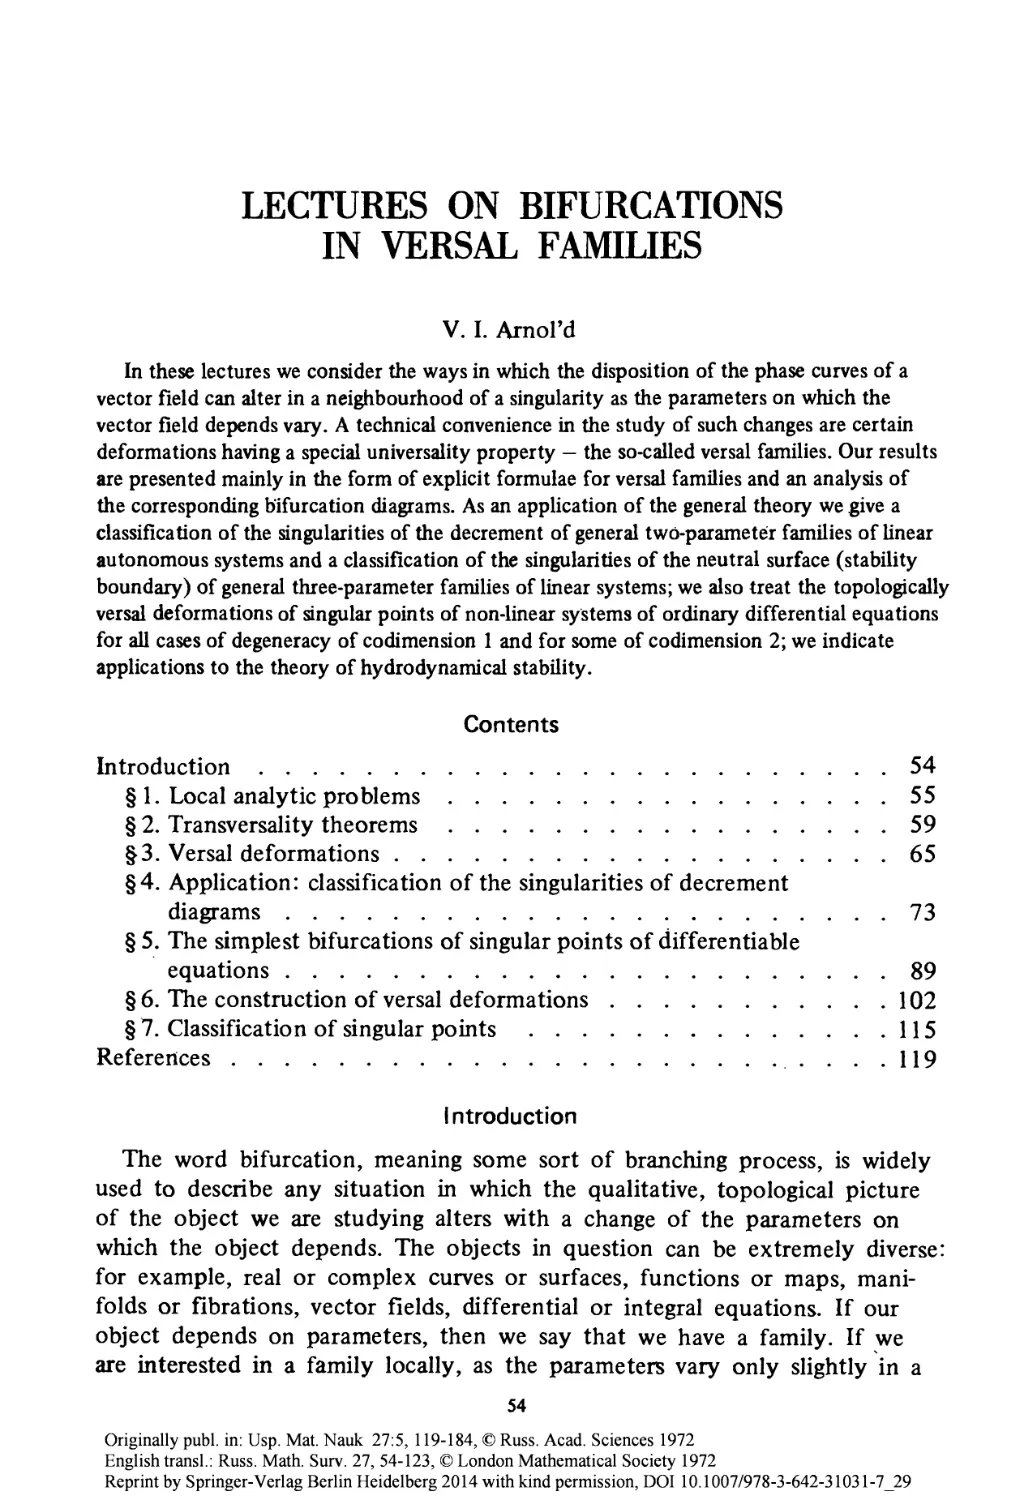 29 Lectures on bifurcations in versal families